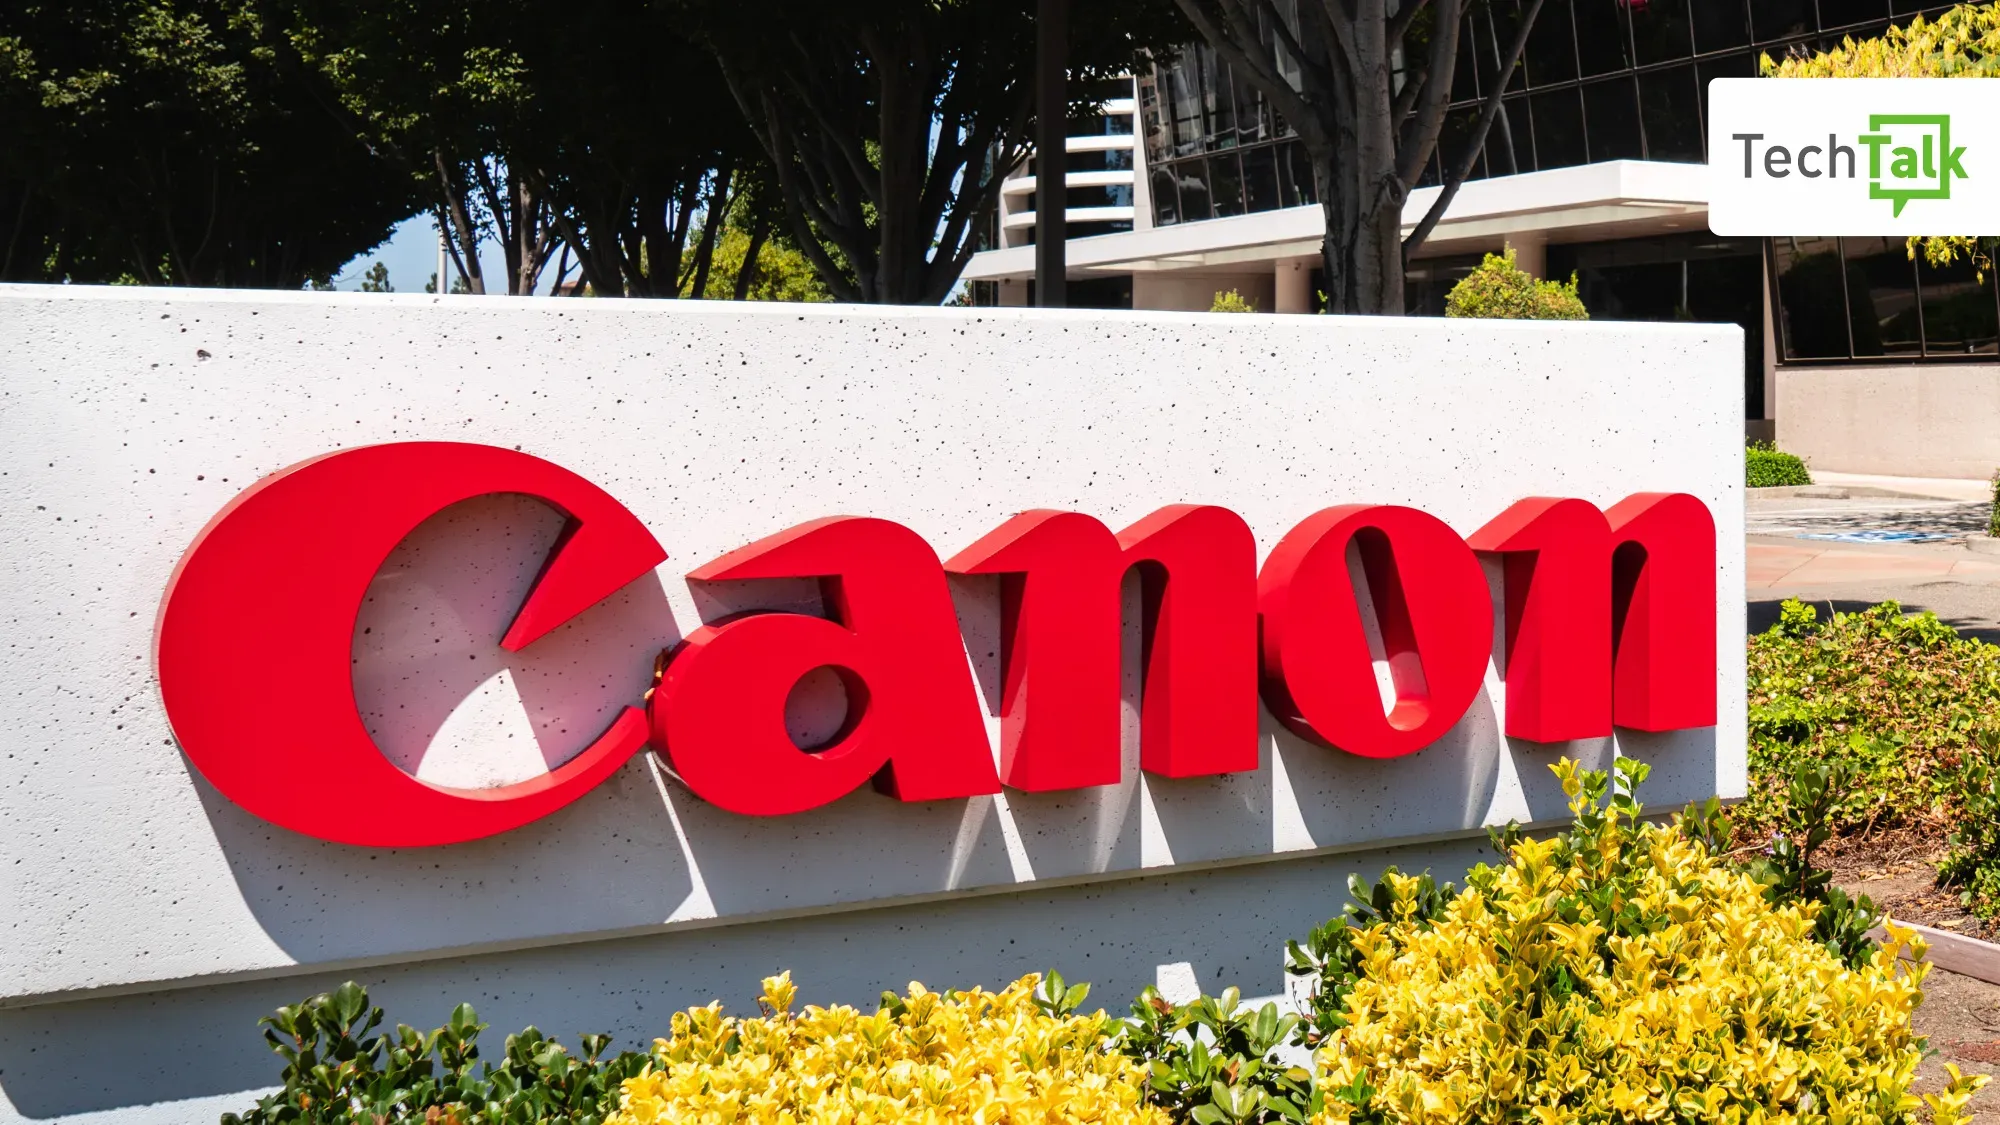 Canon Sees the Digital Transformation of Business Through the Lens of a People-First Approach: Tech Talk